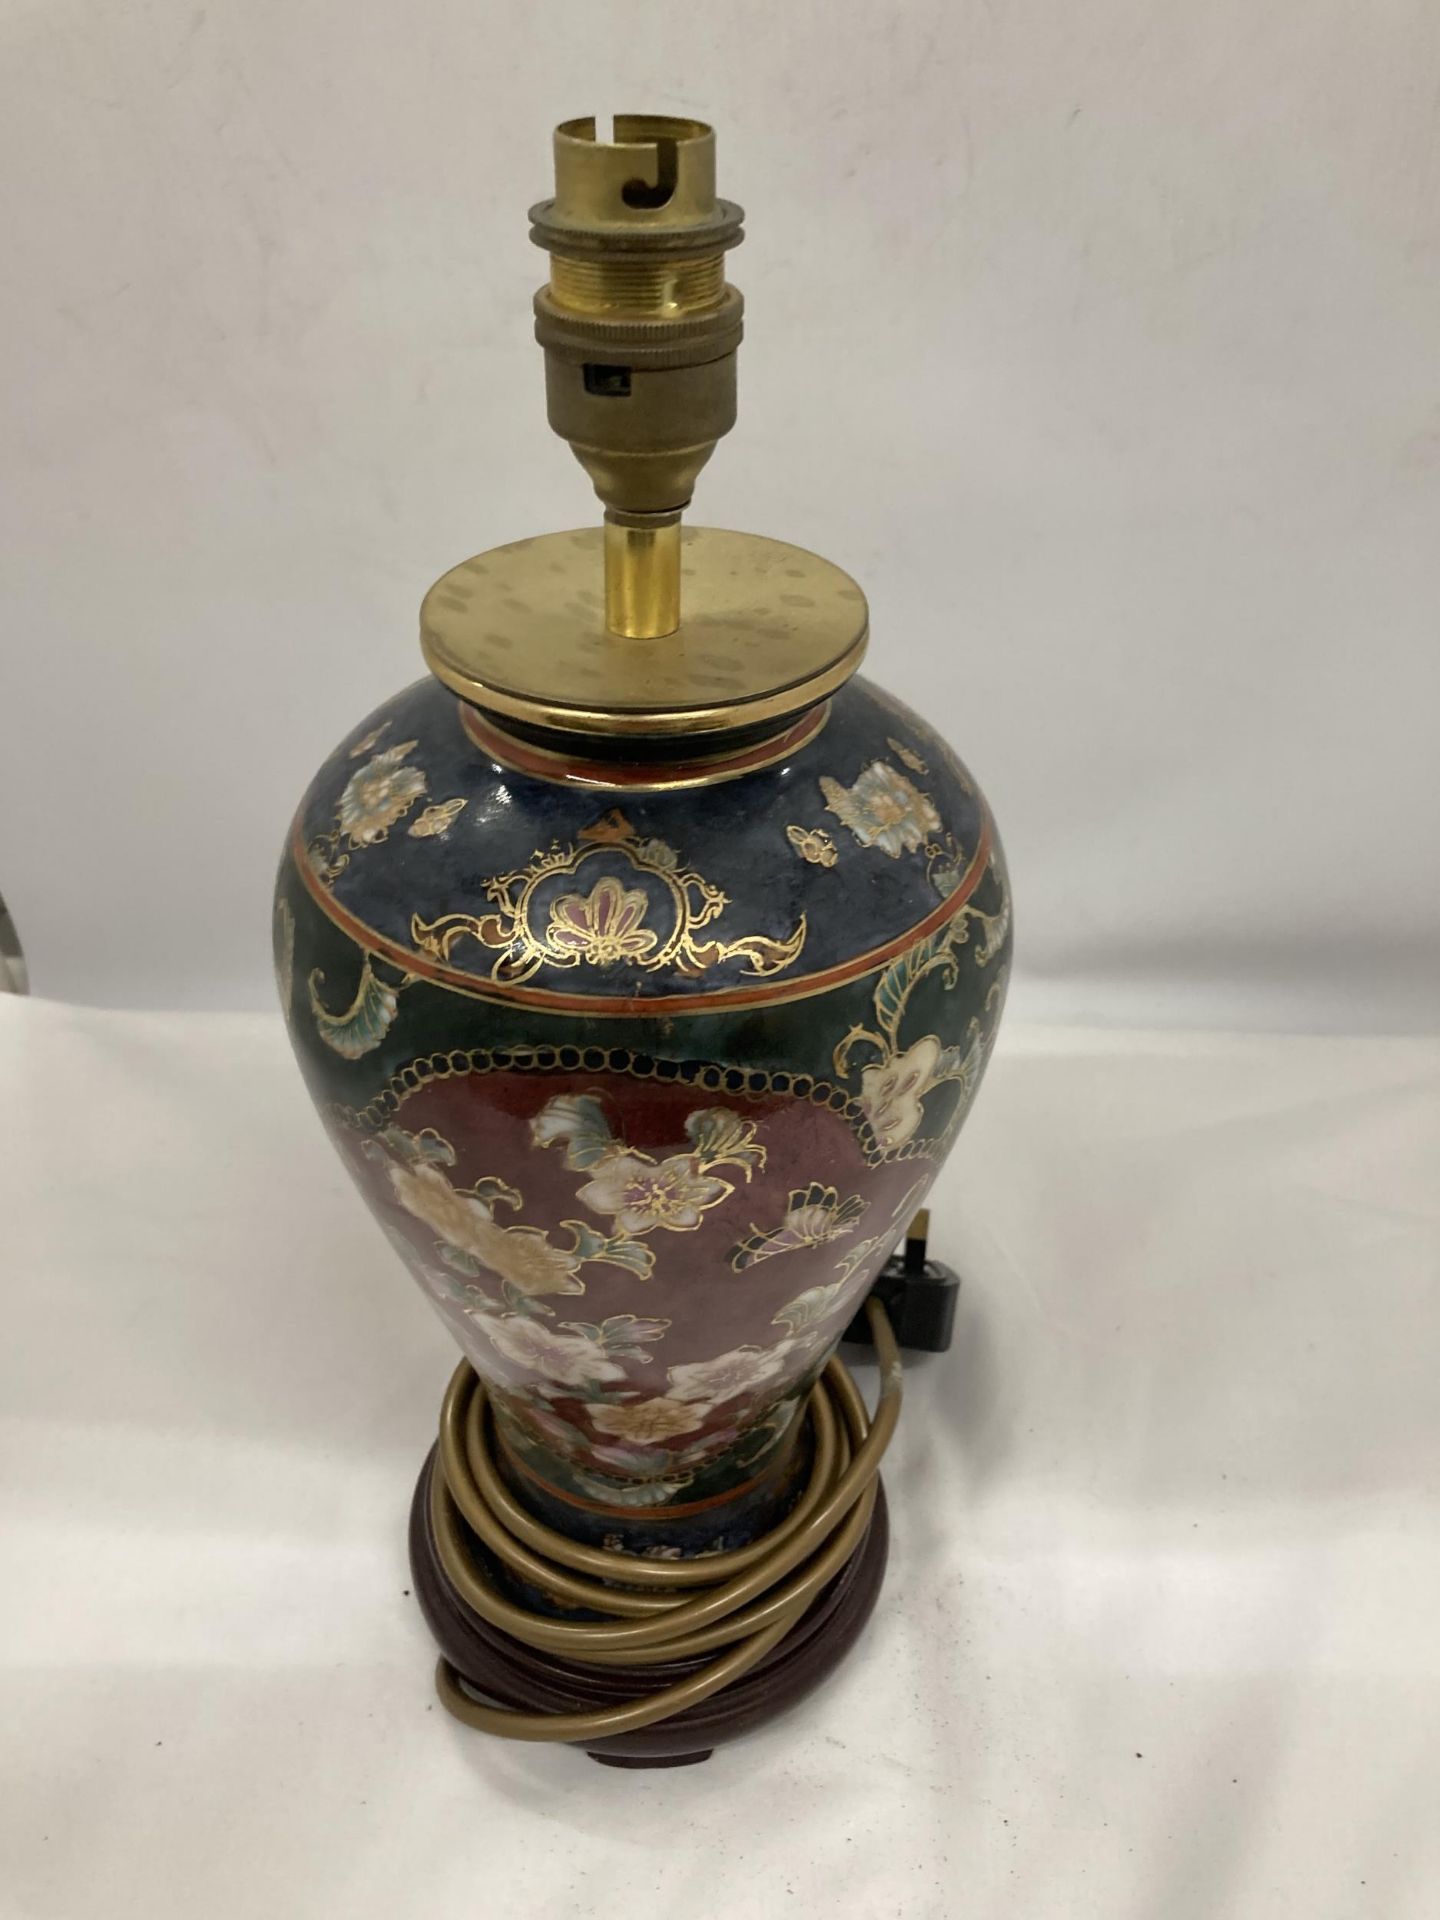 AN ORIENTAL STYLE CERAMIC TABLE LAMP ON A WOODEN BASE, HEIGHT 28CM - Image 2 of 3